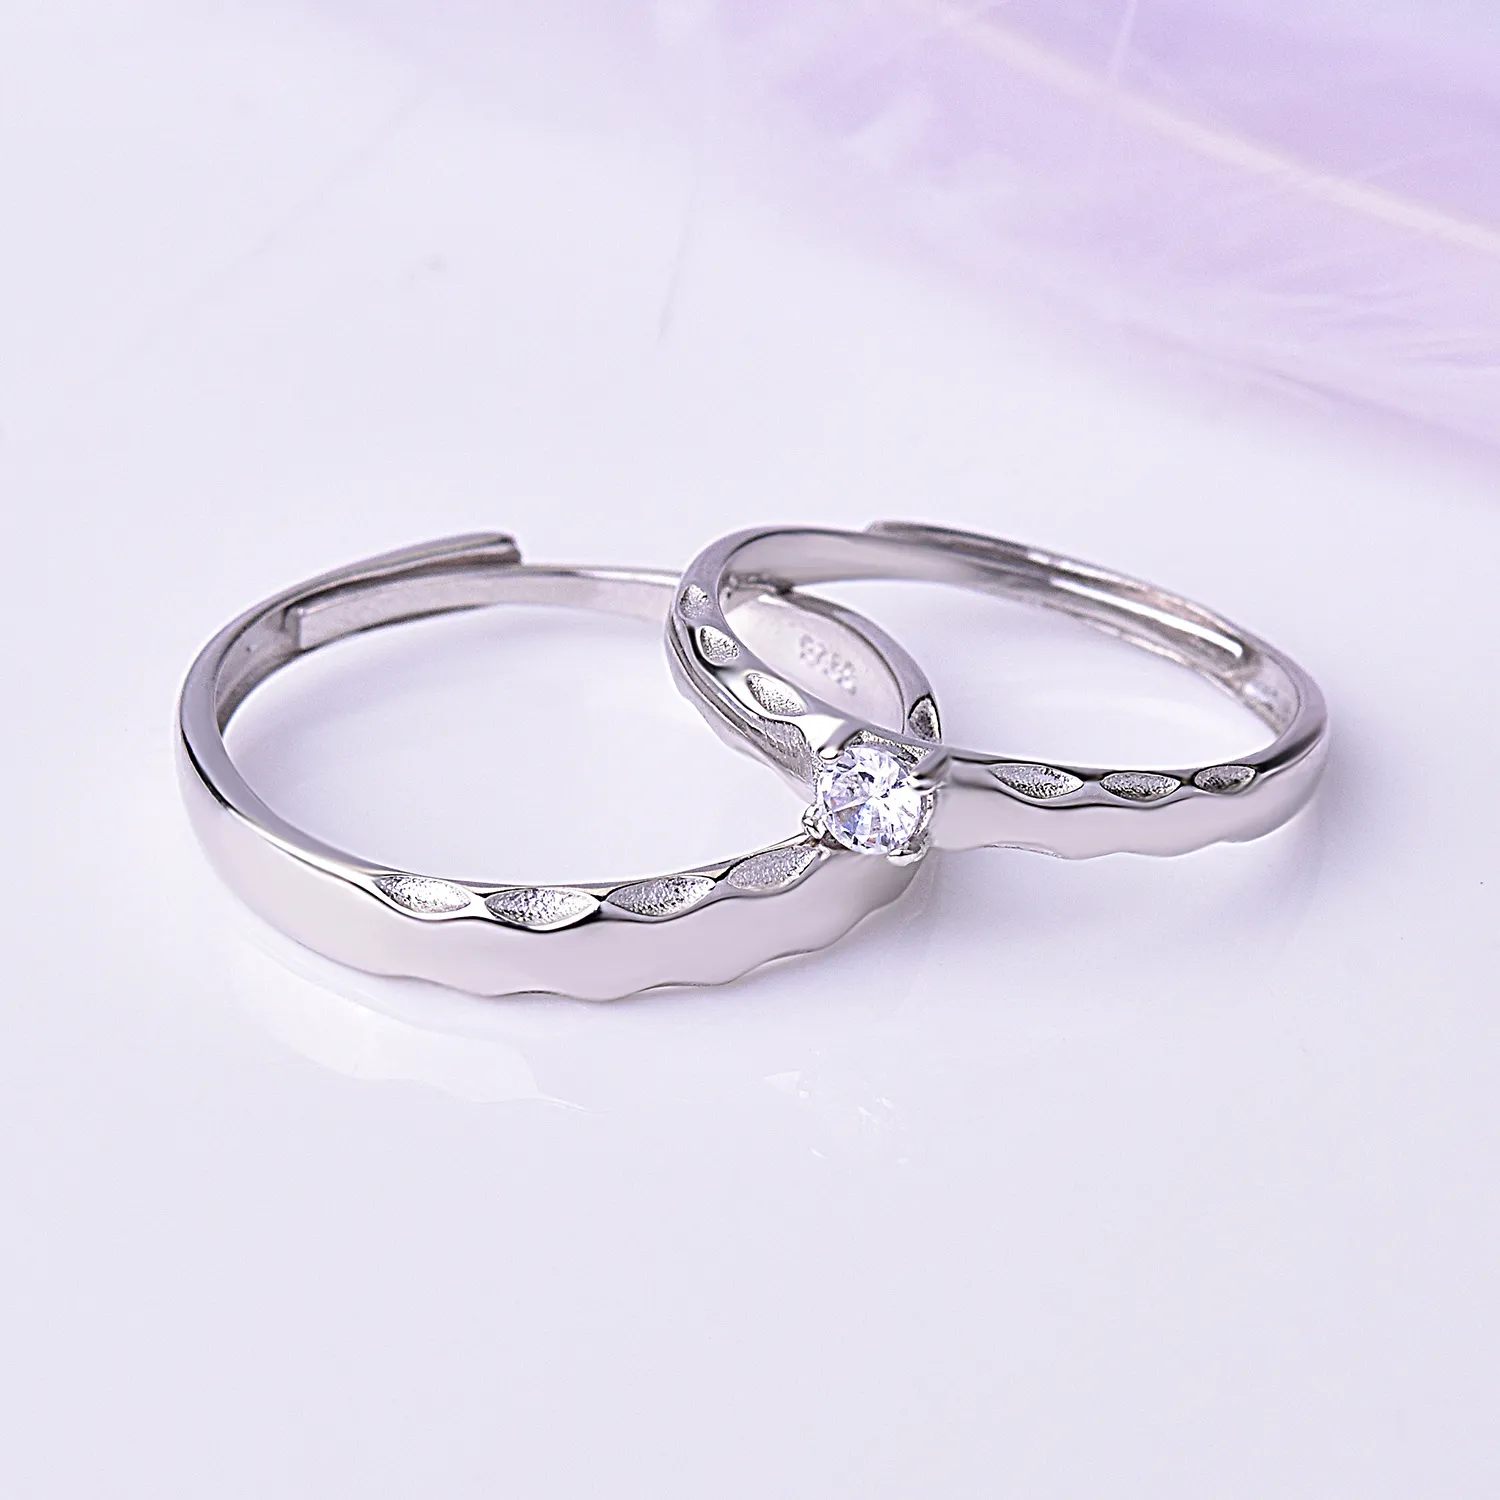 Thaya S925 Sterling Silver Hinged Wedding Ring Original Design For Couples,  Resizable Fine Jewelry For Women And Men Perfect For Wedding, Engagement,  And Party Item #231027 From Shu05, $14.35 | DHgate.Com